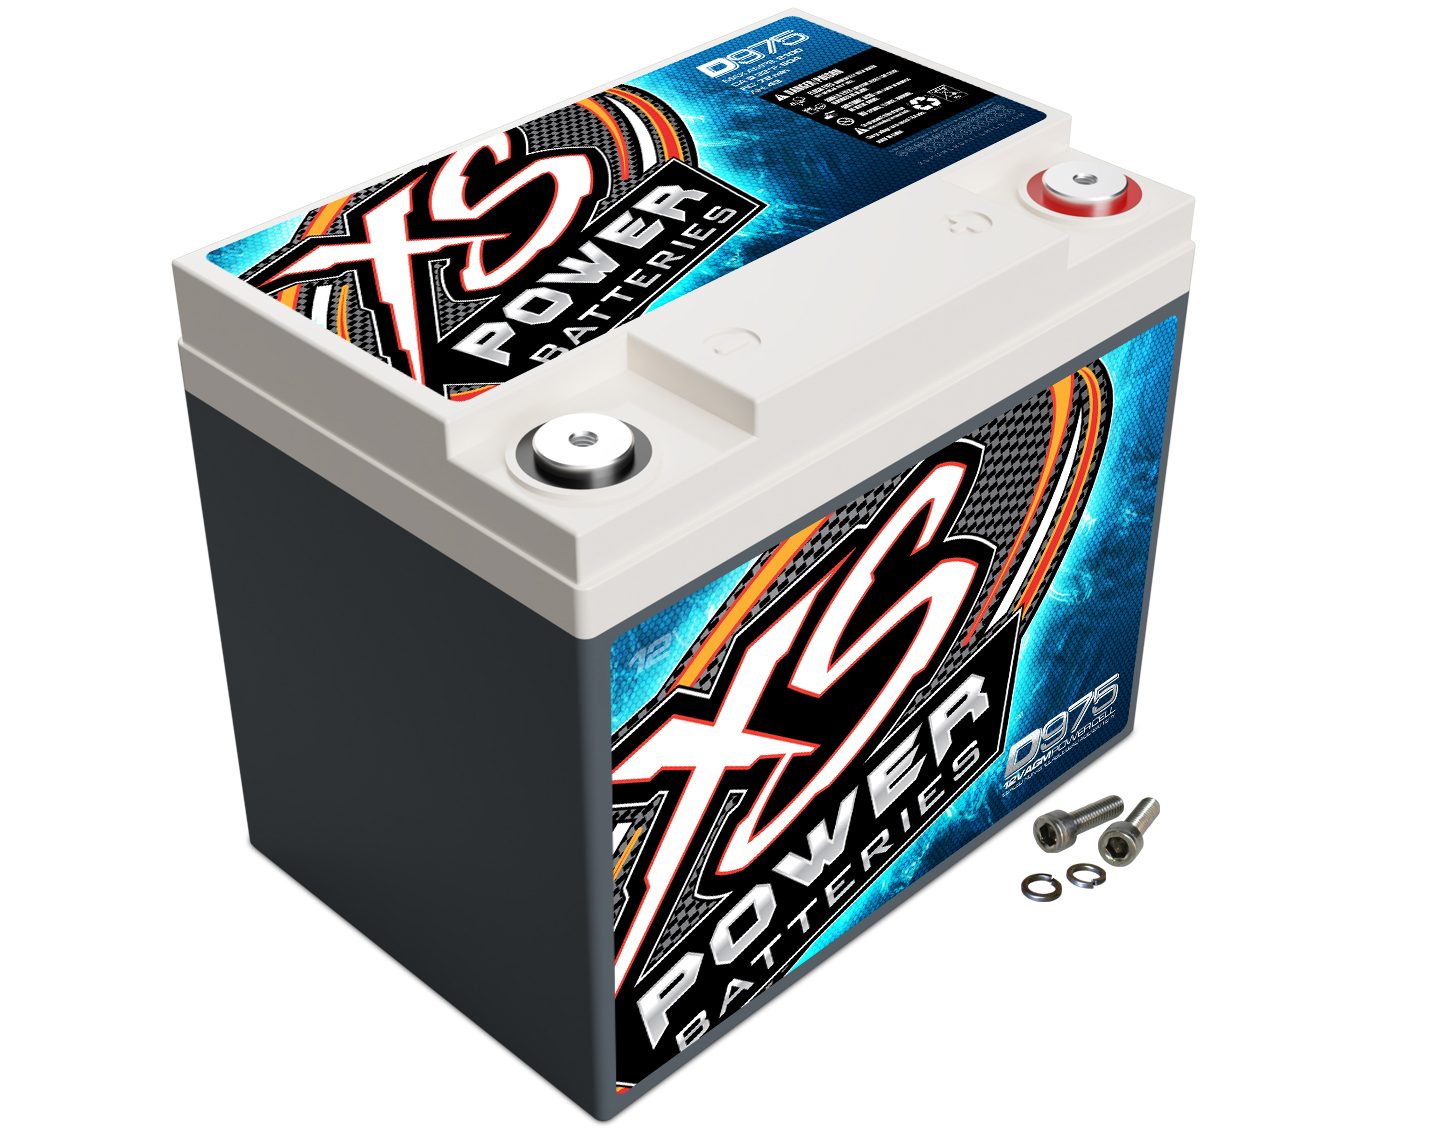 As a second battery which size would I need for a 2000 watt amp?